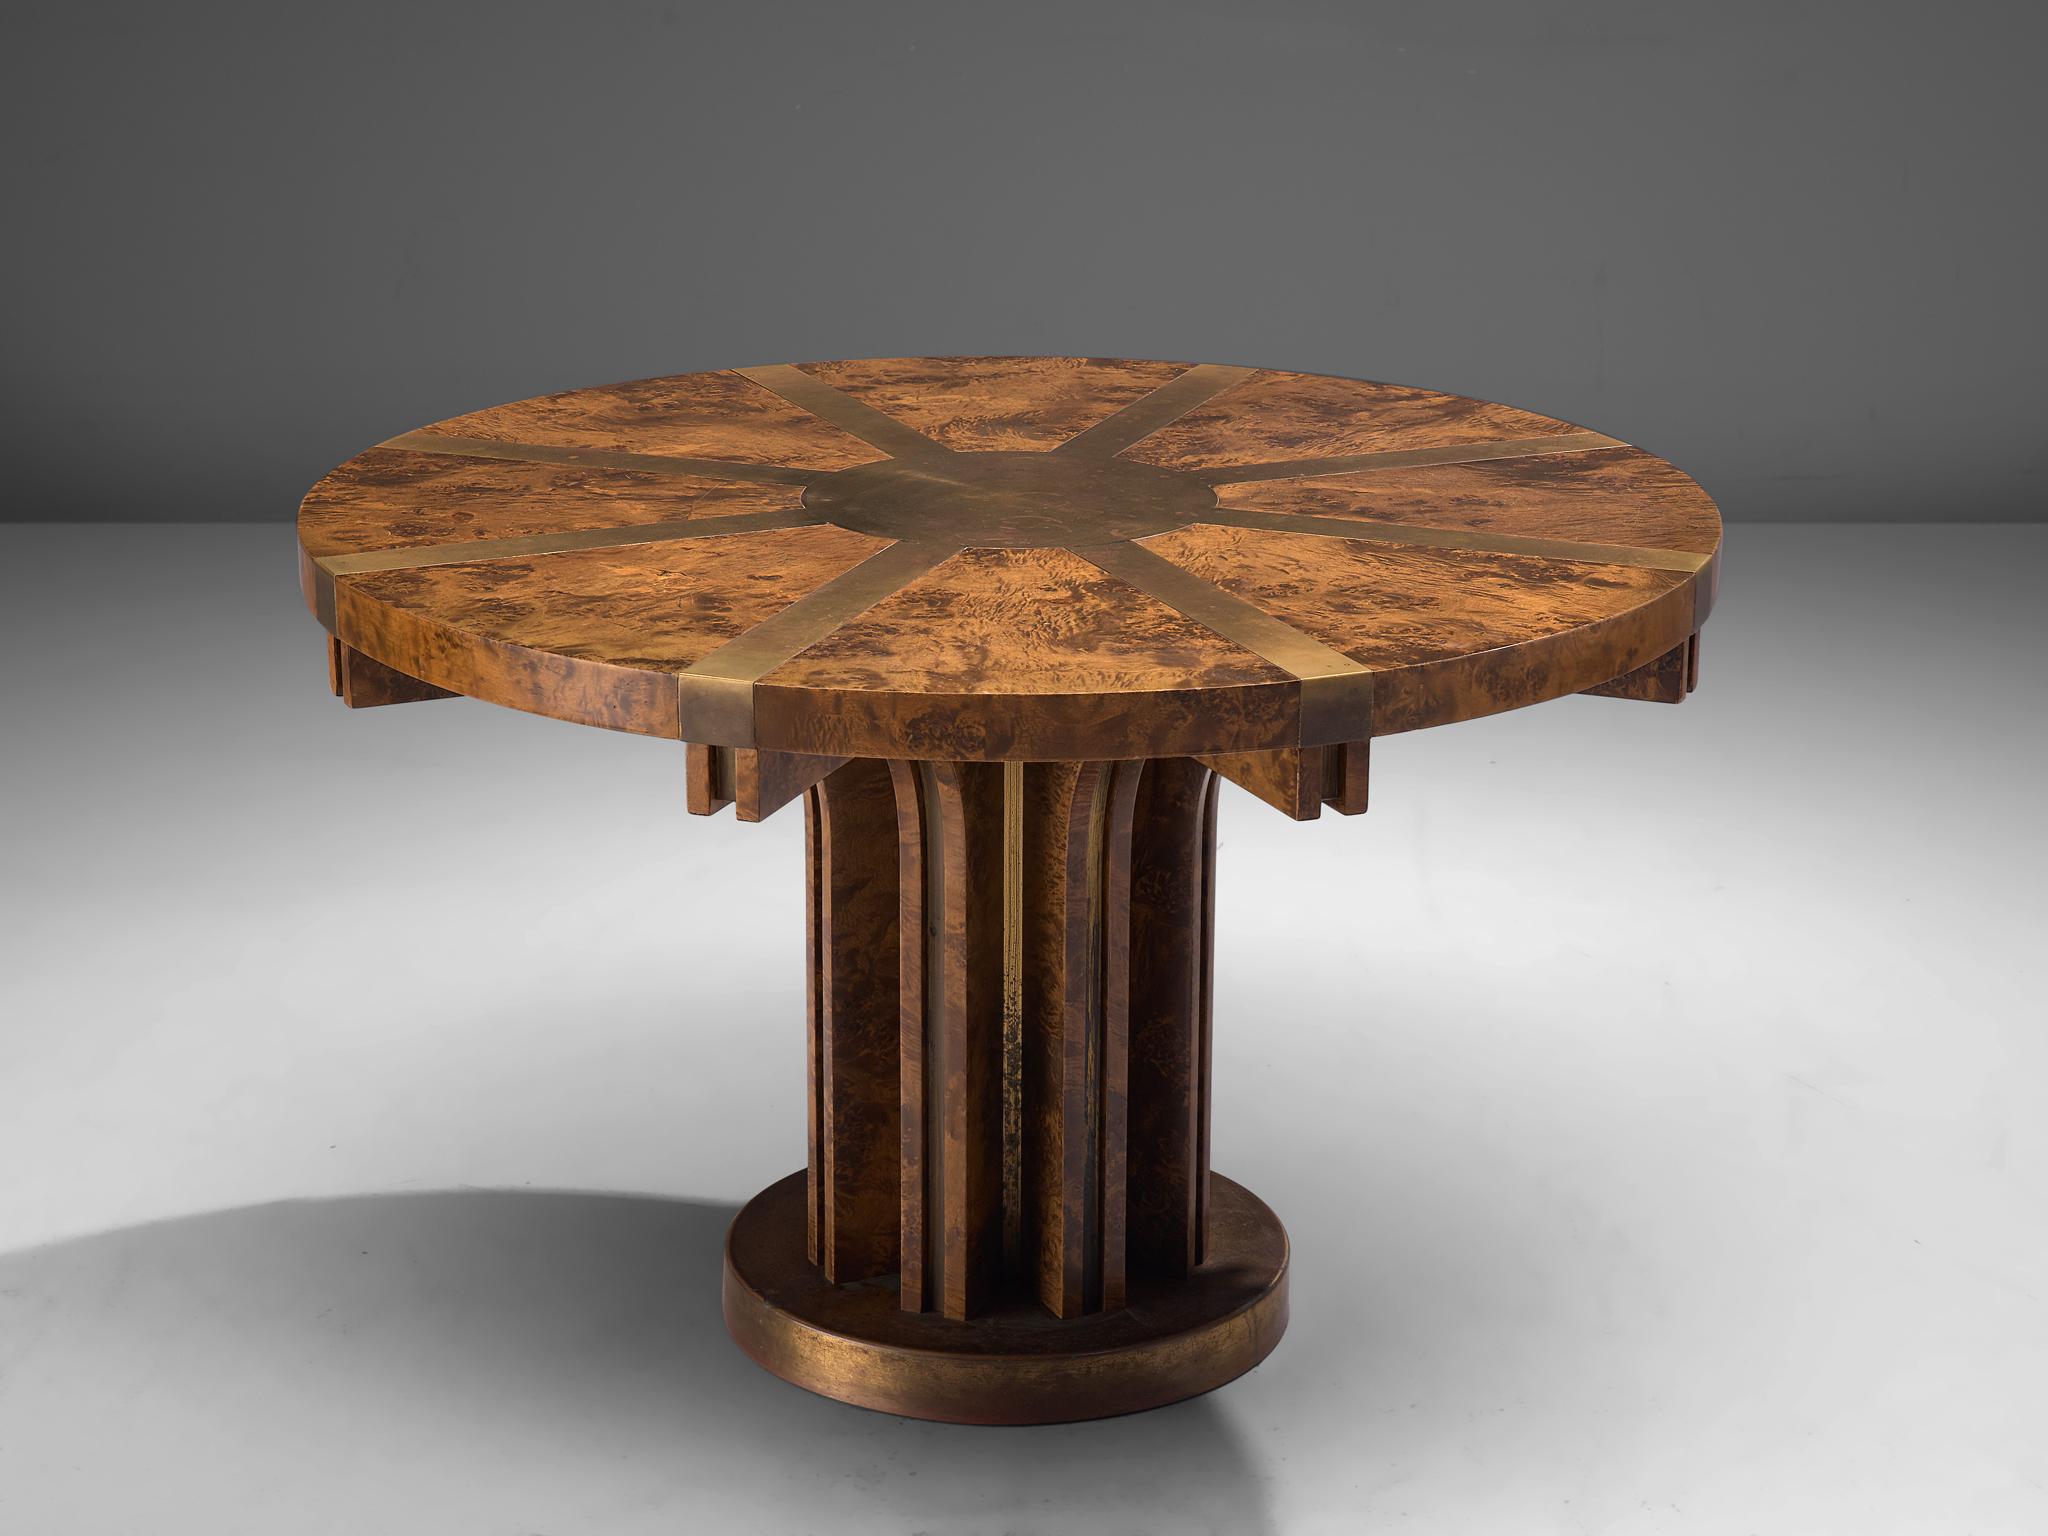 Brutalist pedestal table in burl wood and brass, Italy, 1950s

This sturdy pedestal table shows a pattern in eight repetitive elements, featured in the table top, construction and base. Clearly crafted by a true expert, showing nice craftsmanship